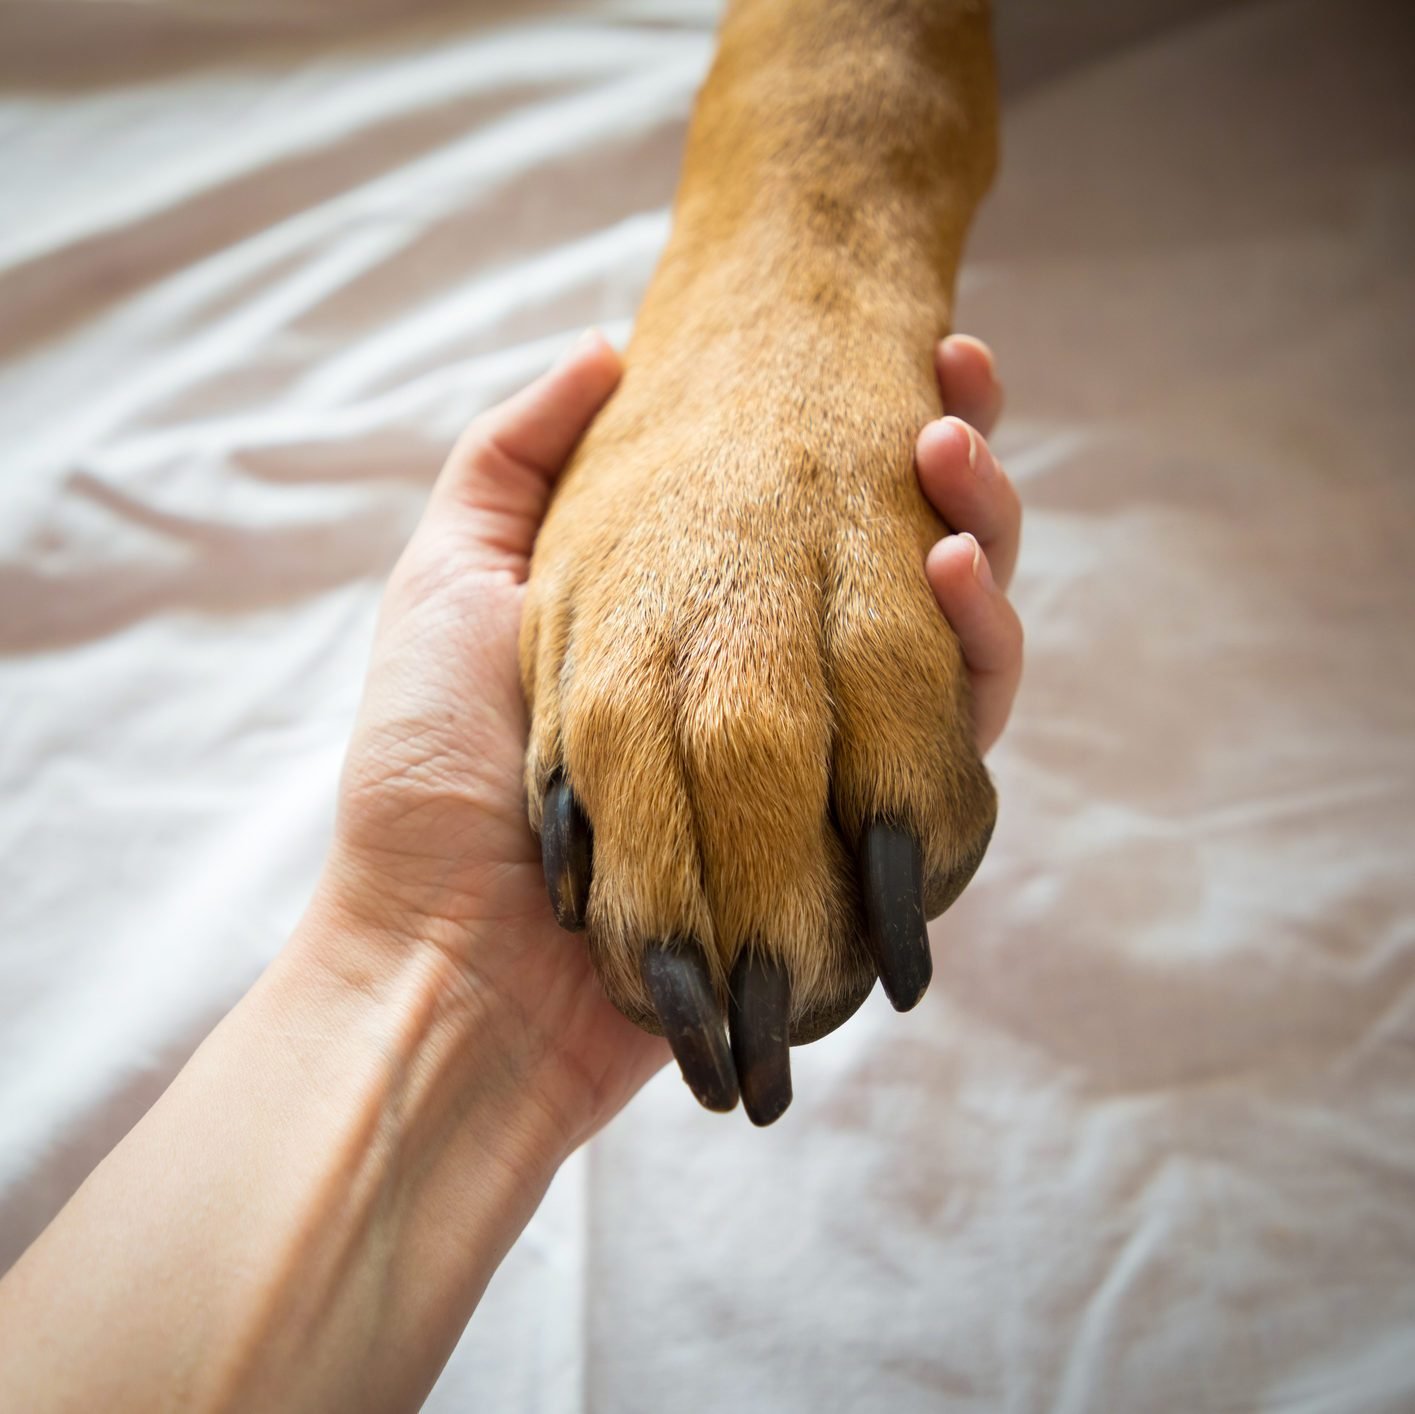 Best Clippers to Trim Your Dog's Nails at Home | Reader's Digest